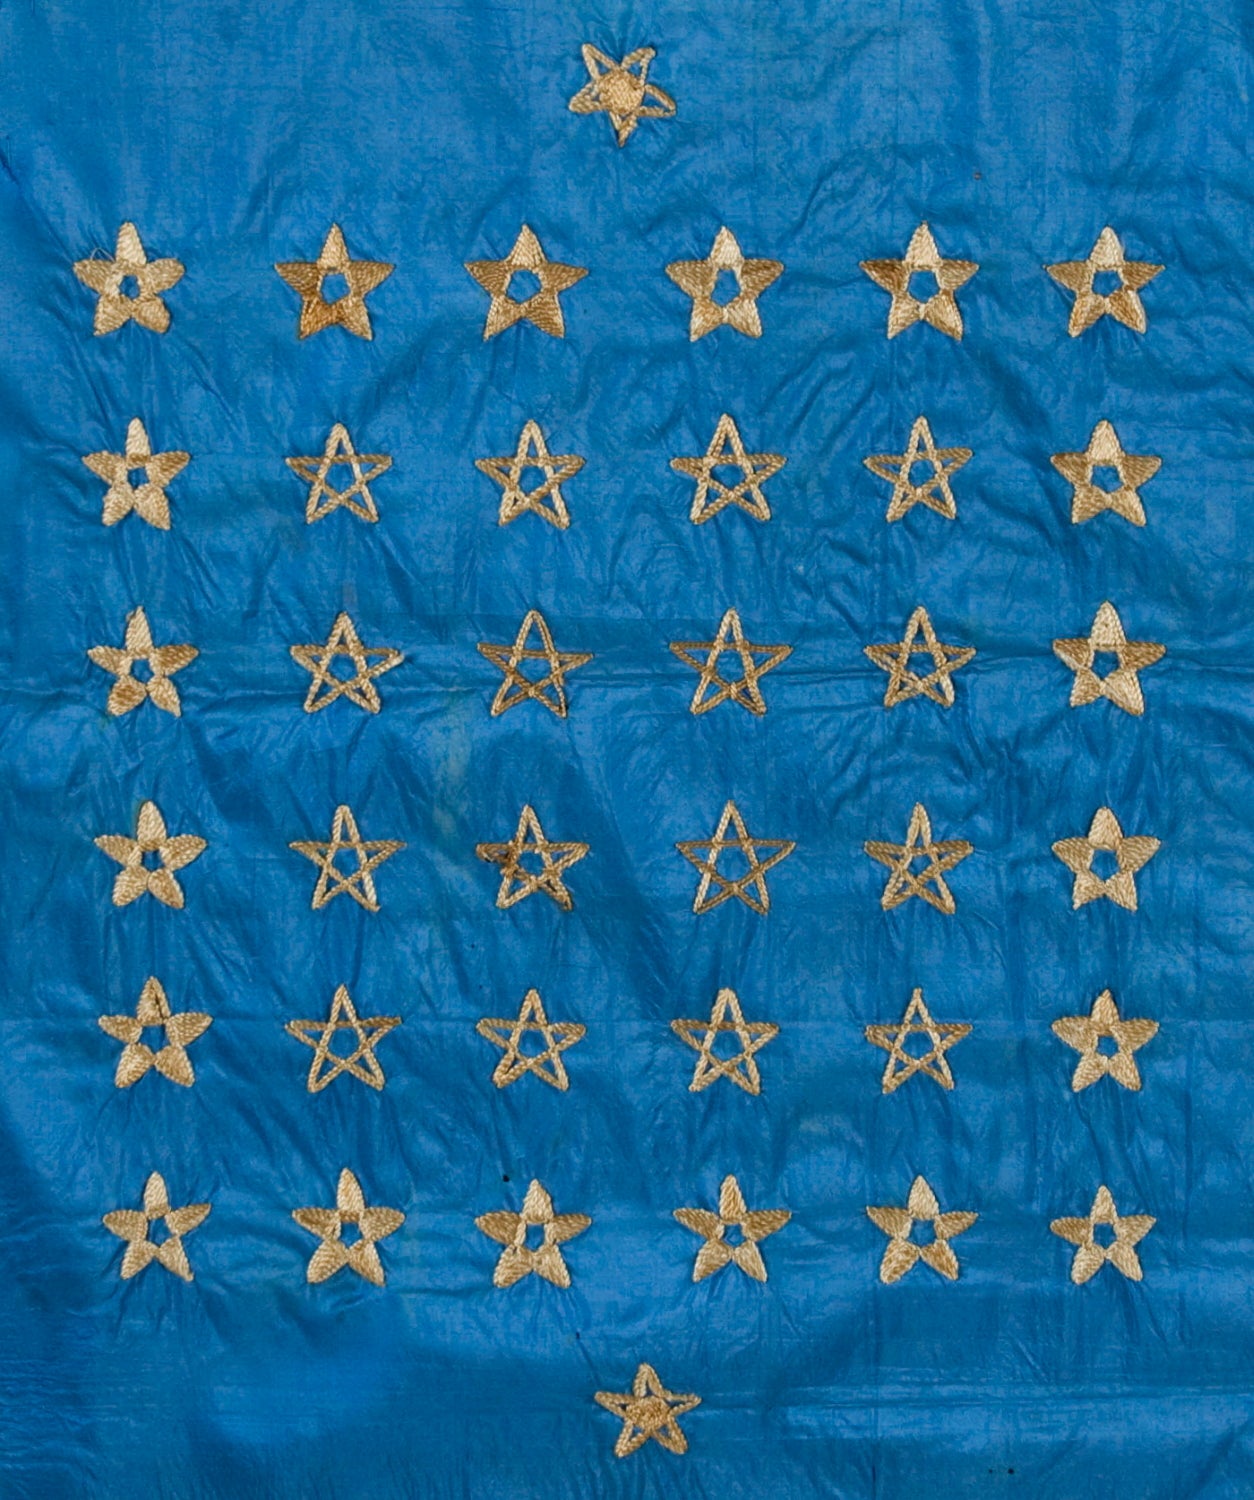 flag with 12 stars